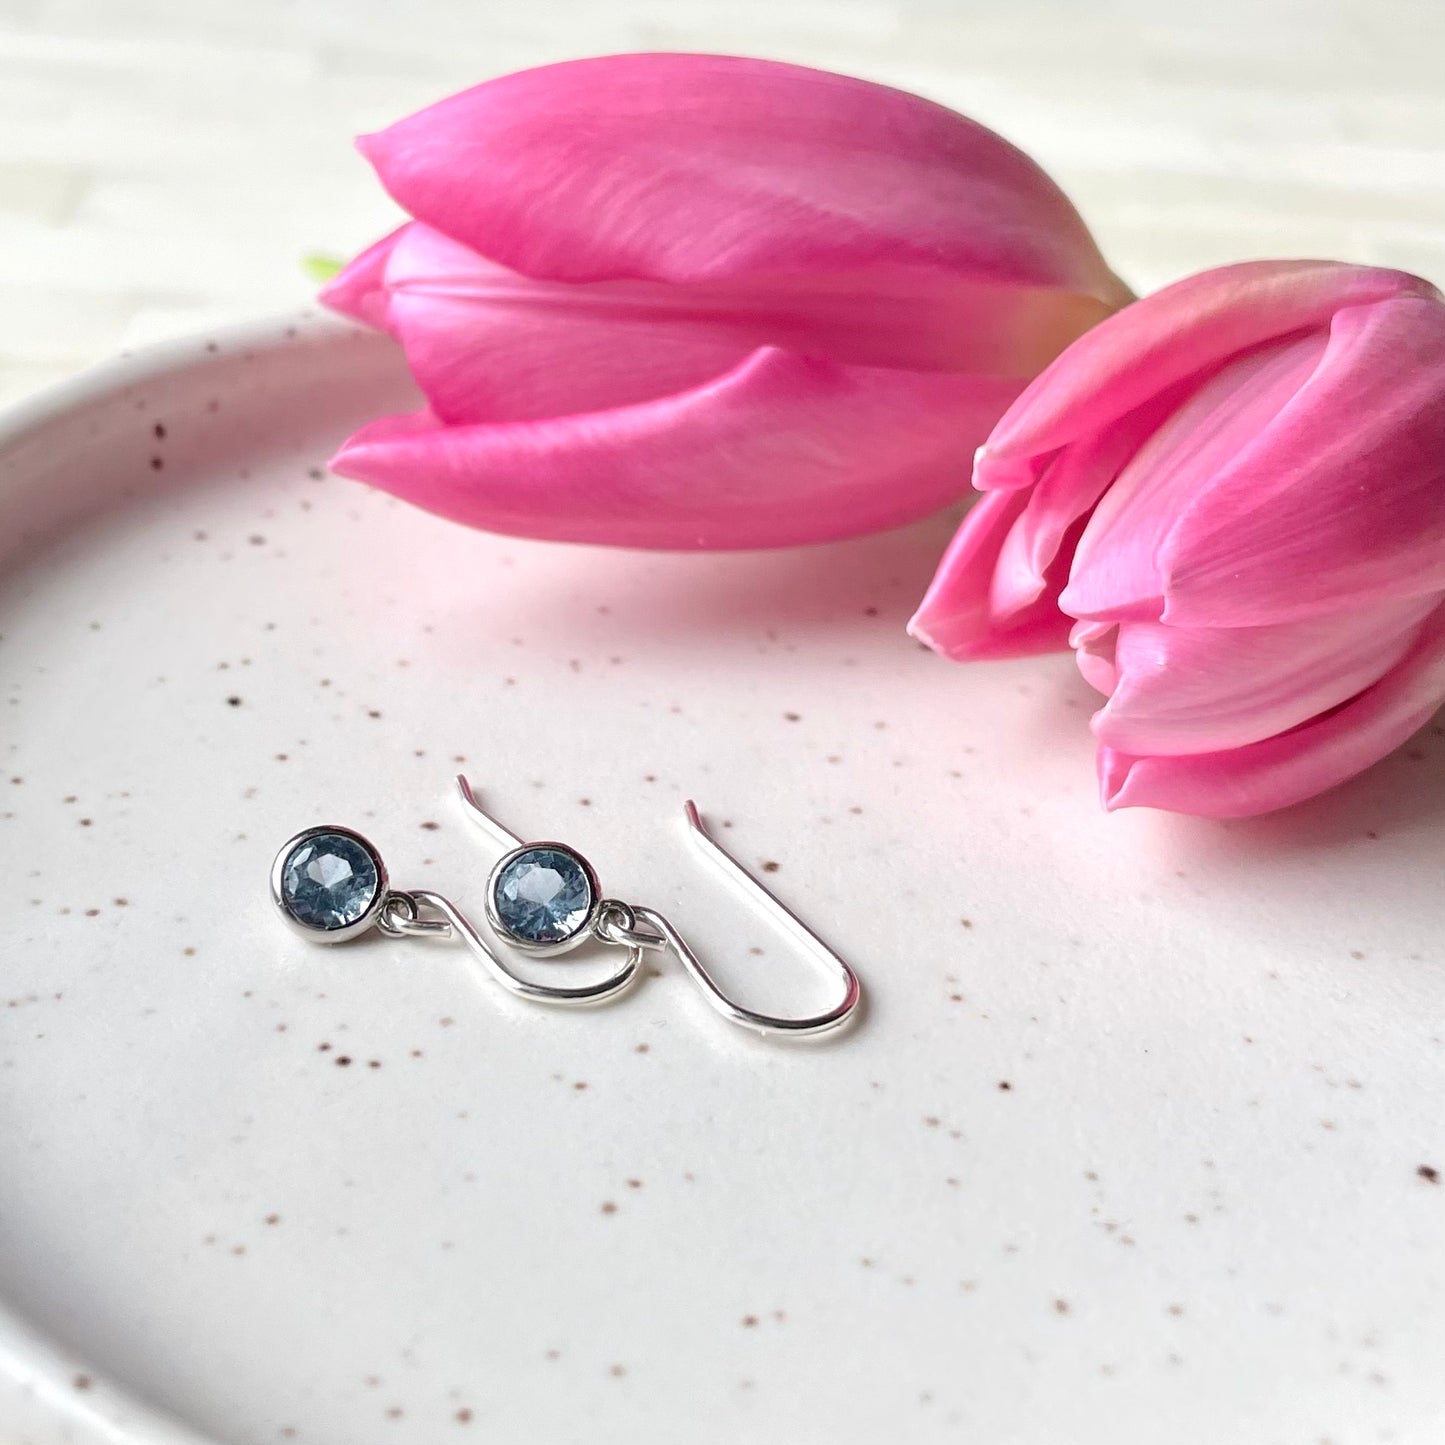 March birthstone earrings. Aquamarine colour. Sterling Silver and cubic zirconia. Made by Wallis Designs in Canada.